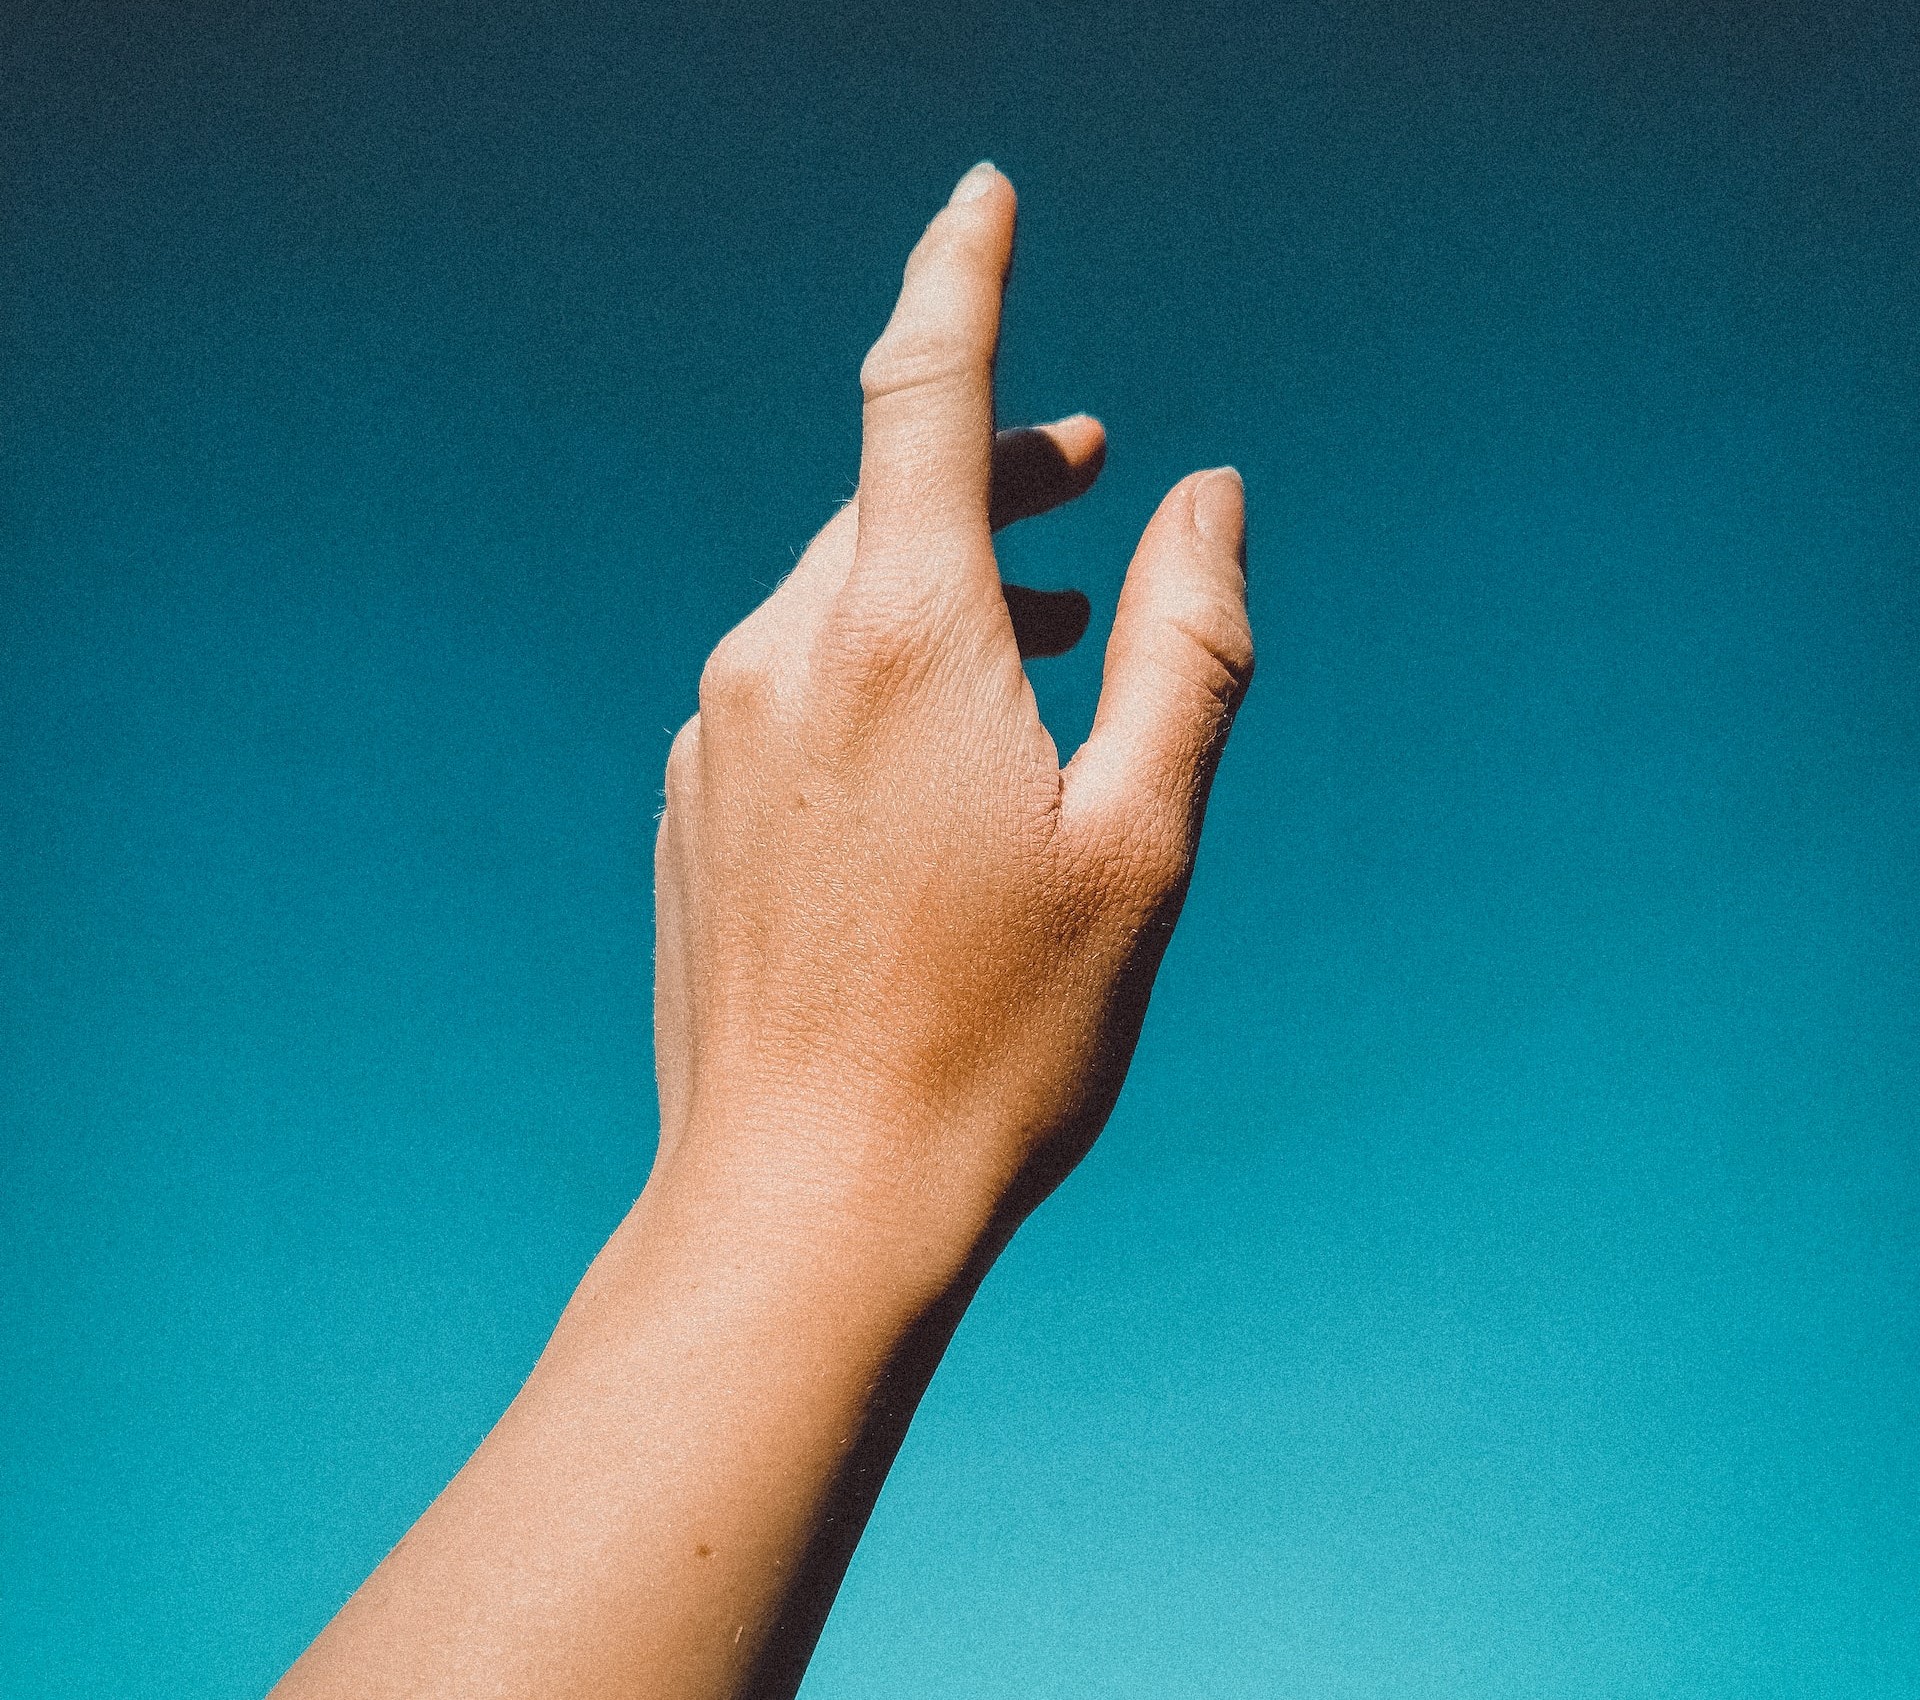 Raised hand against a blue background